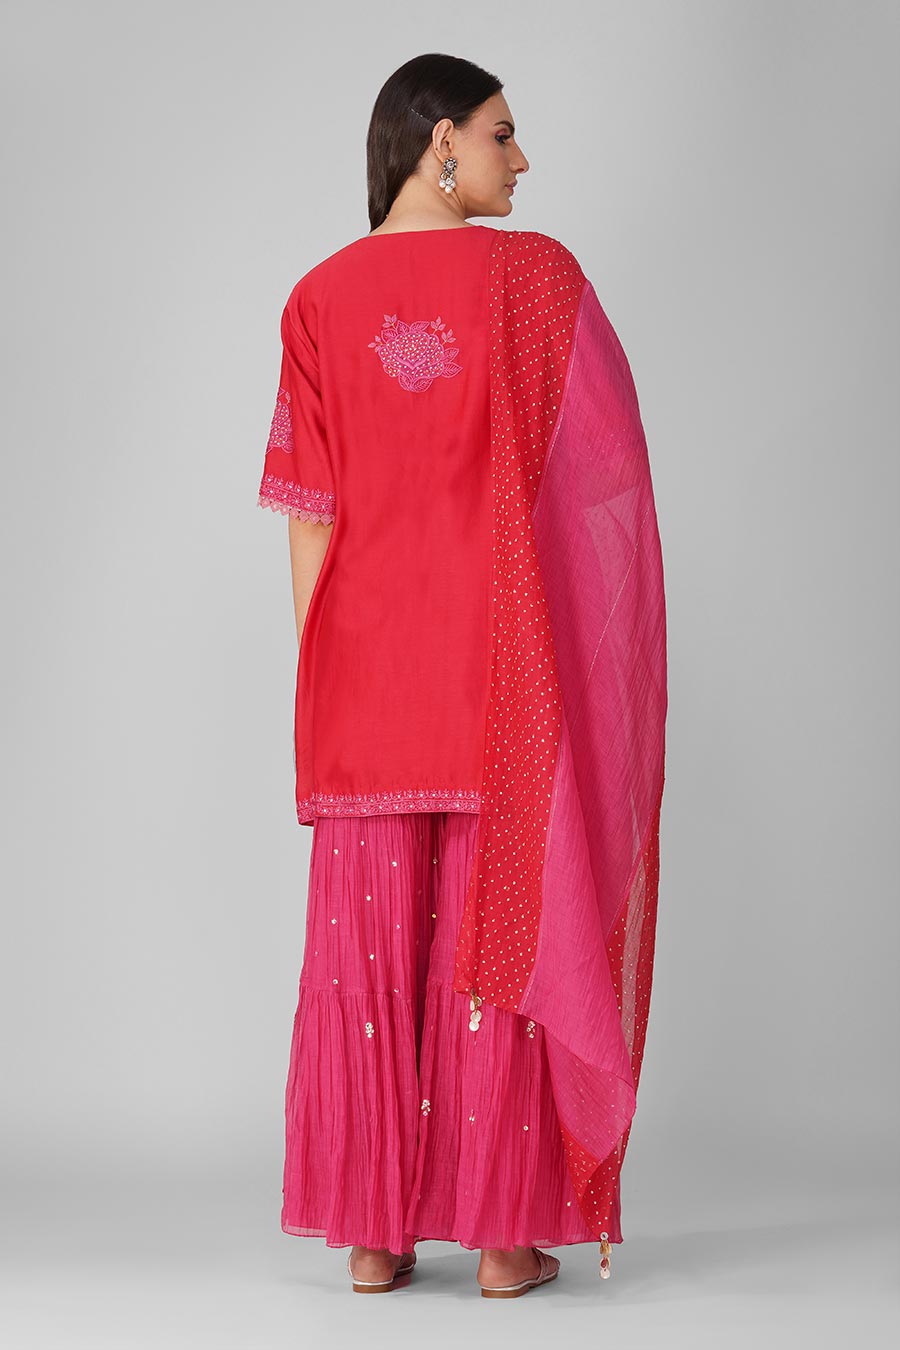 Red-Pink Embroidered Gharara Set